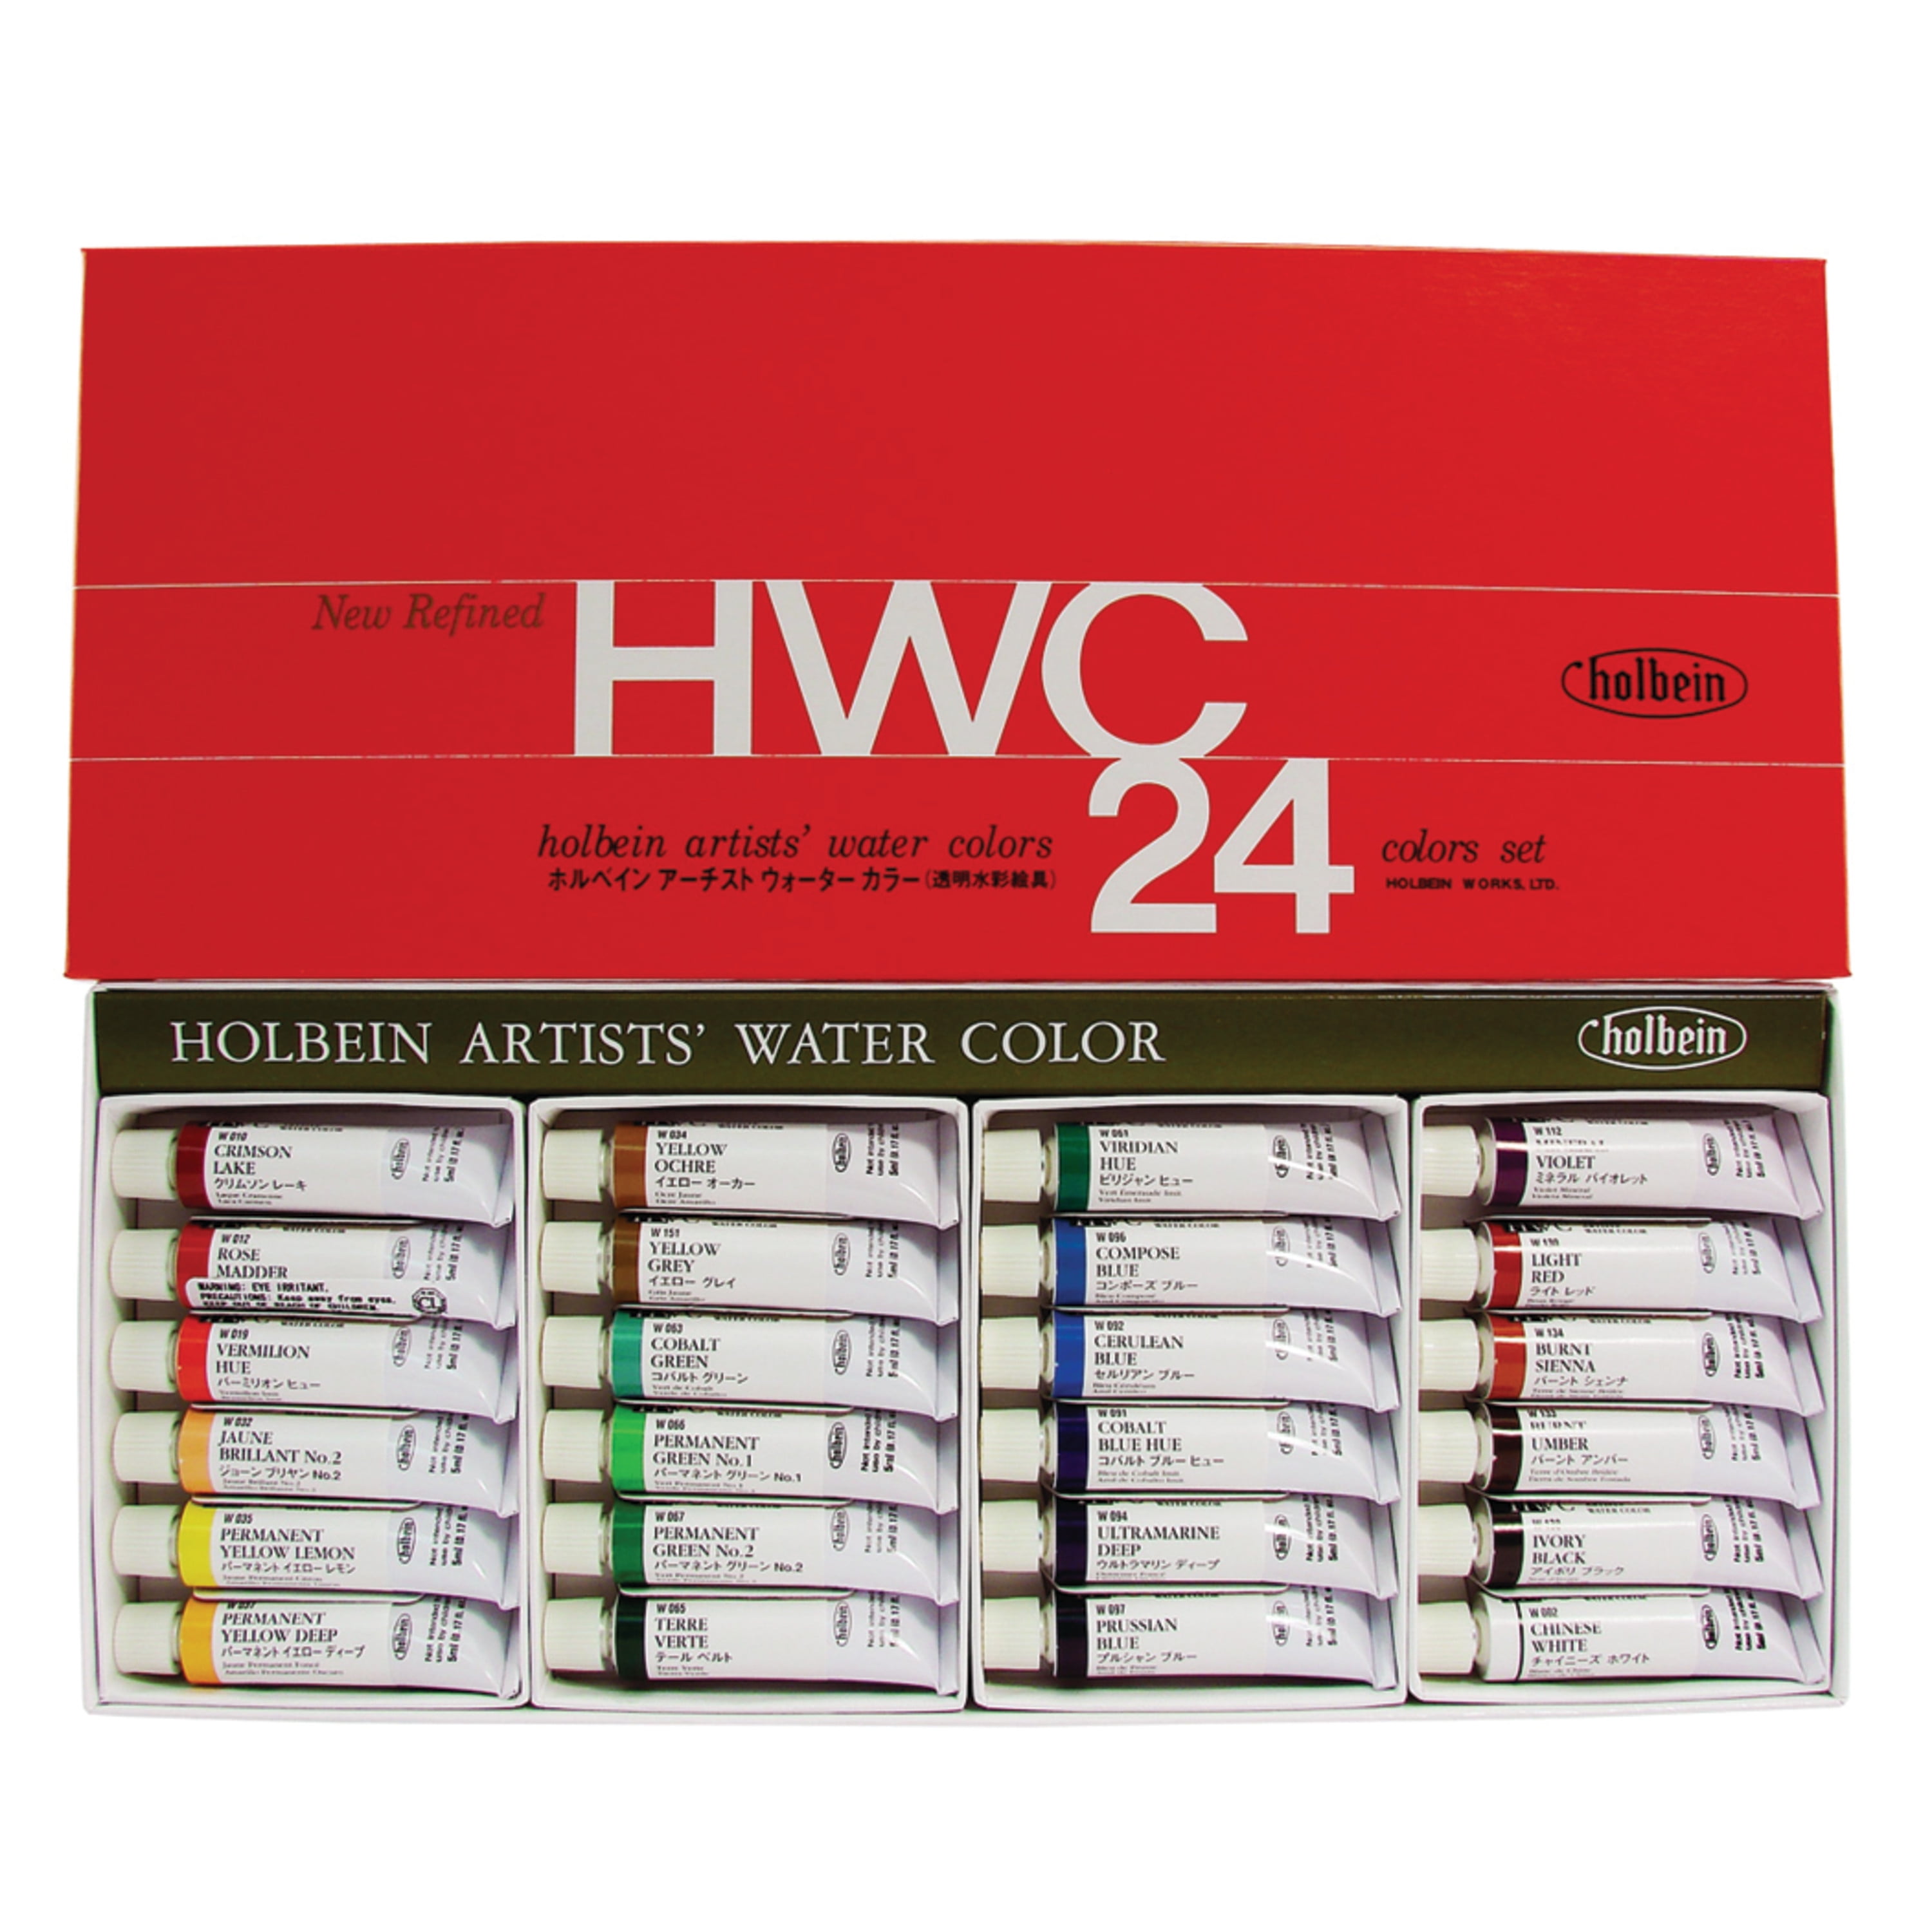 Holbein Artists' Watercolor - Set of 24 5 ml